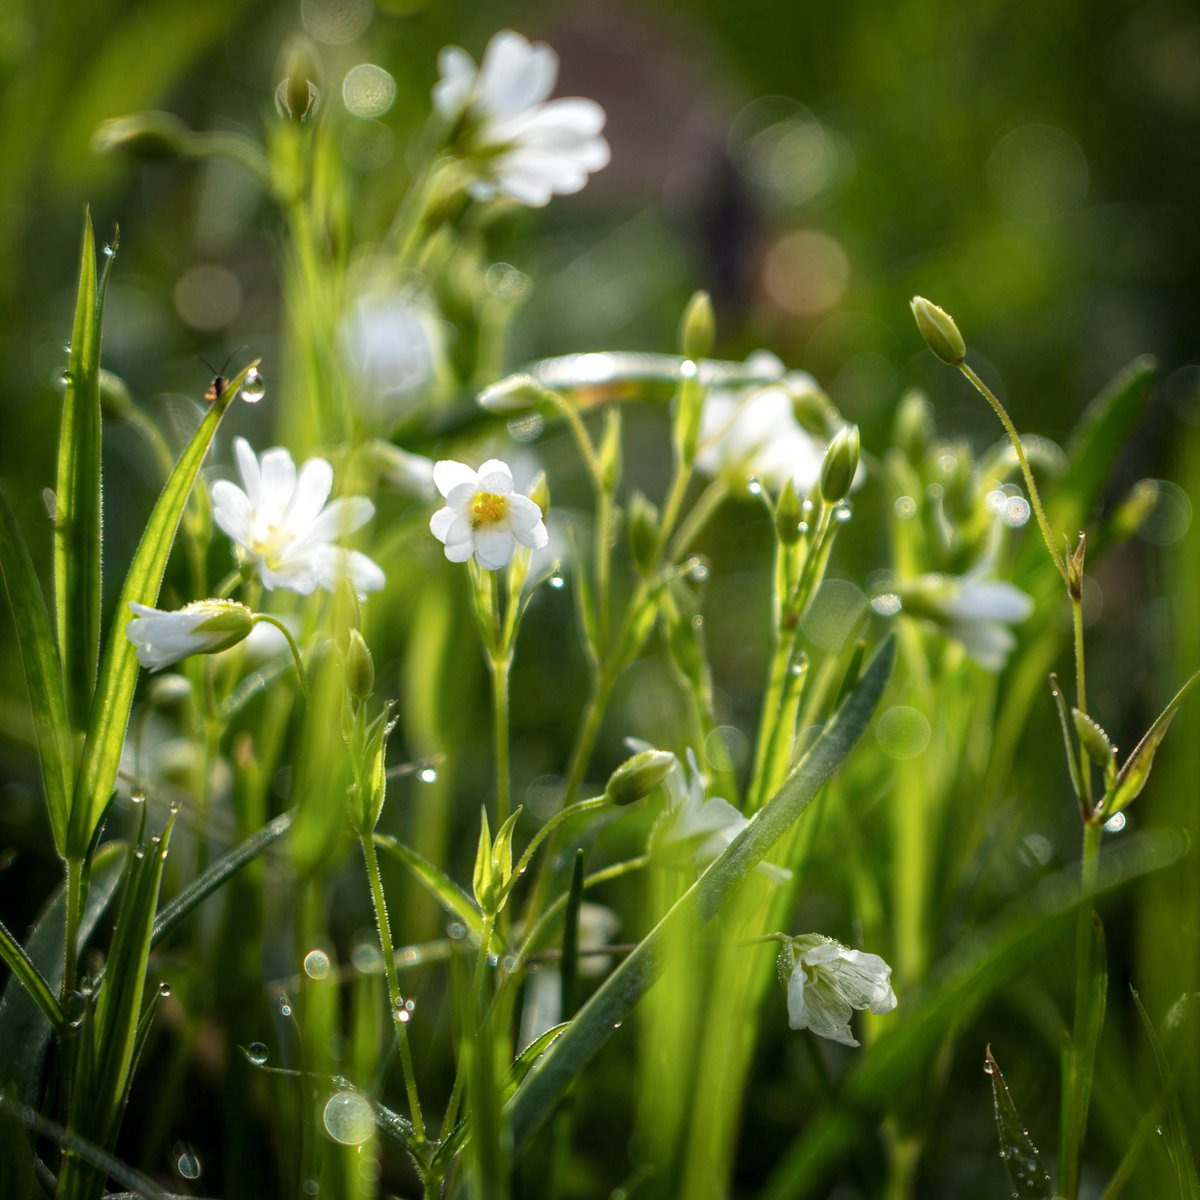 All too often we pass by so much tiny beauty, absorbed by our loud, big lives. How much richer we might be if we paused to notice the delicate details that surround us. Sitting with these stitchwort flowers today, I particularly loved that little bug dwarfed by a shining dewdrop.